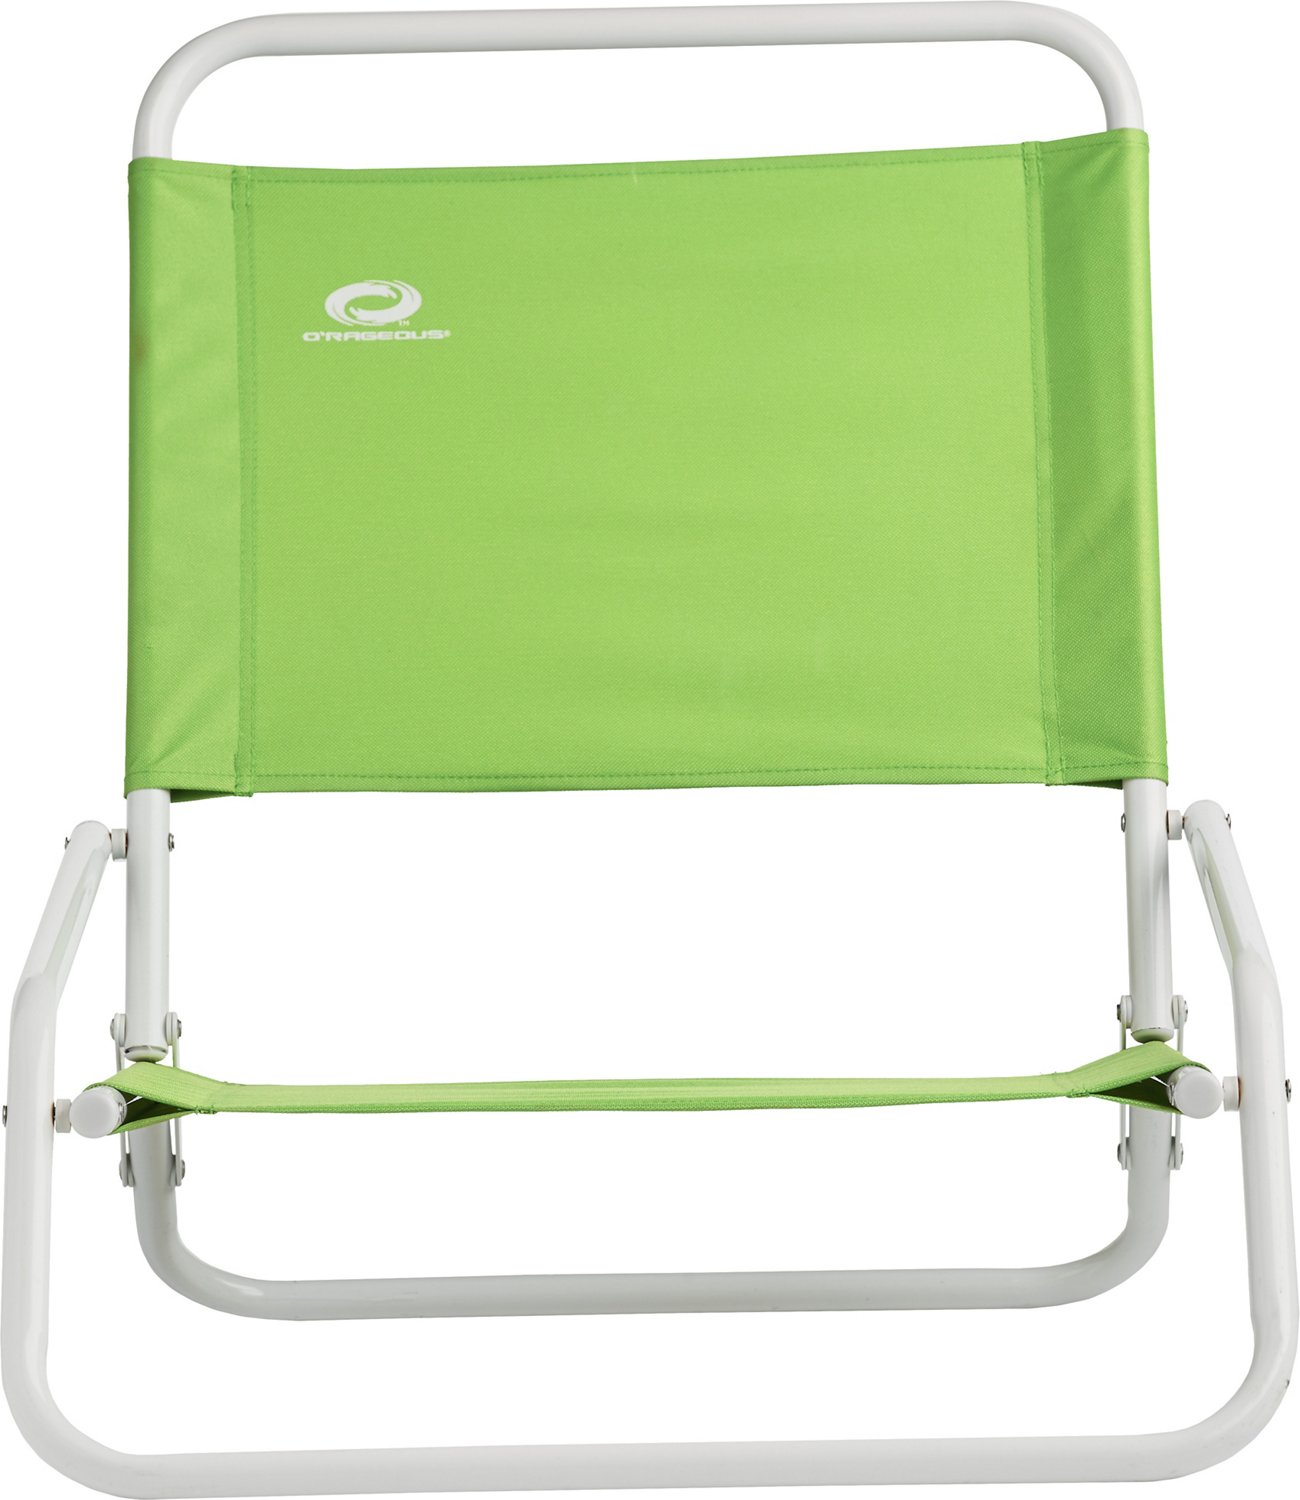 88 Recomended O rageous beach quad chair for Christmas Day